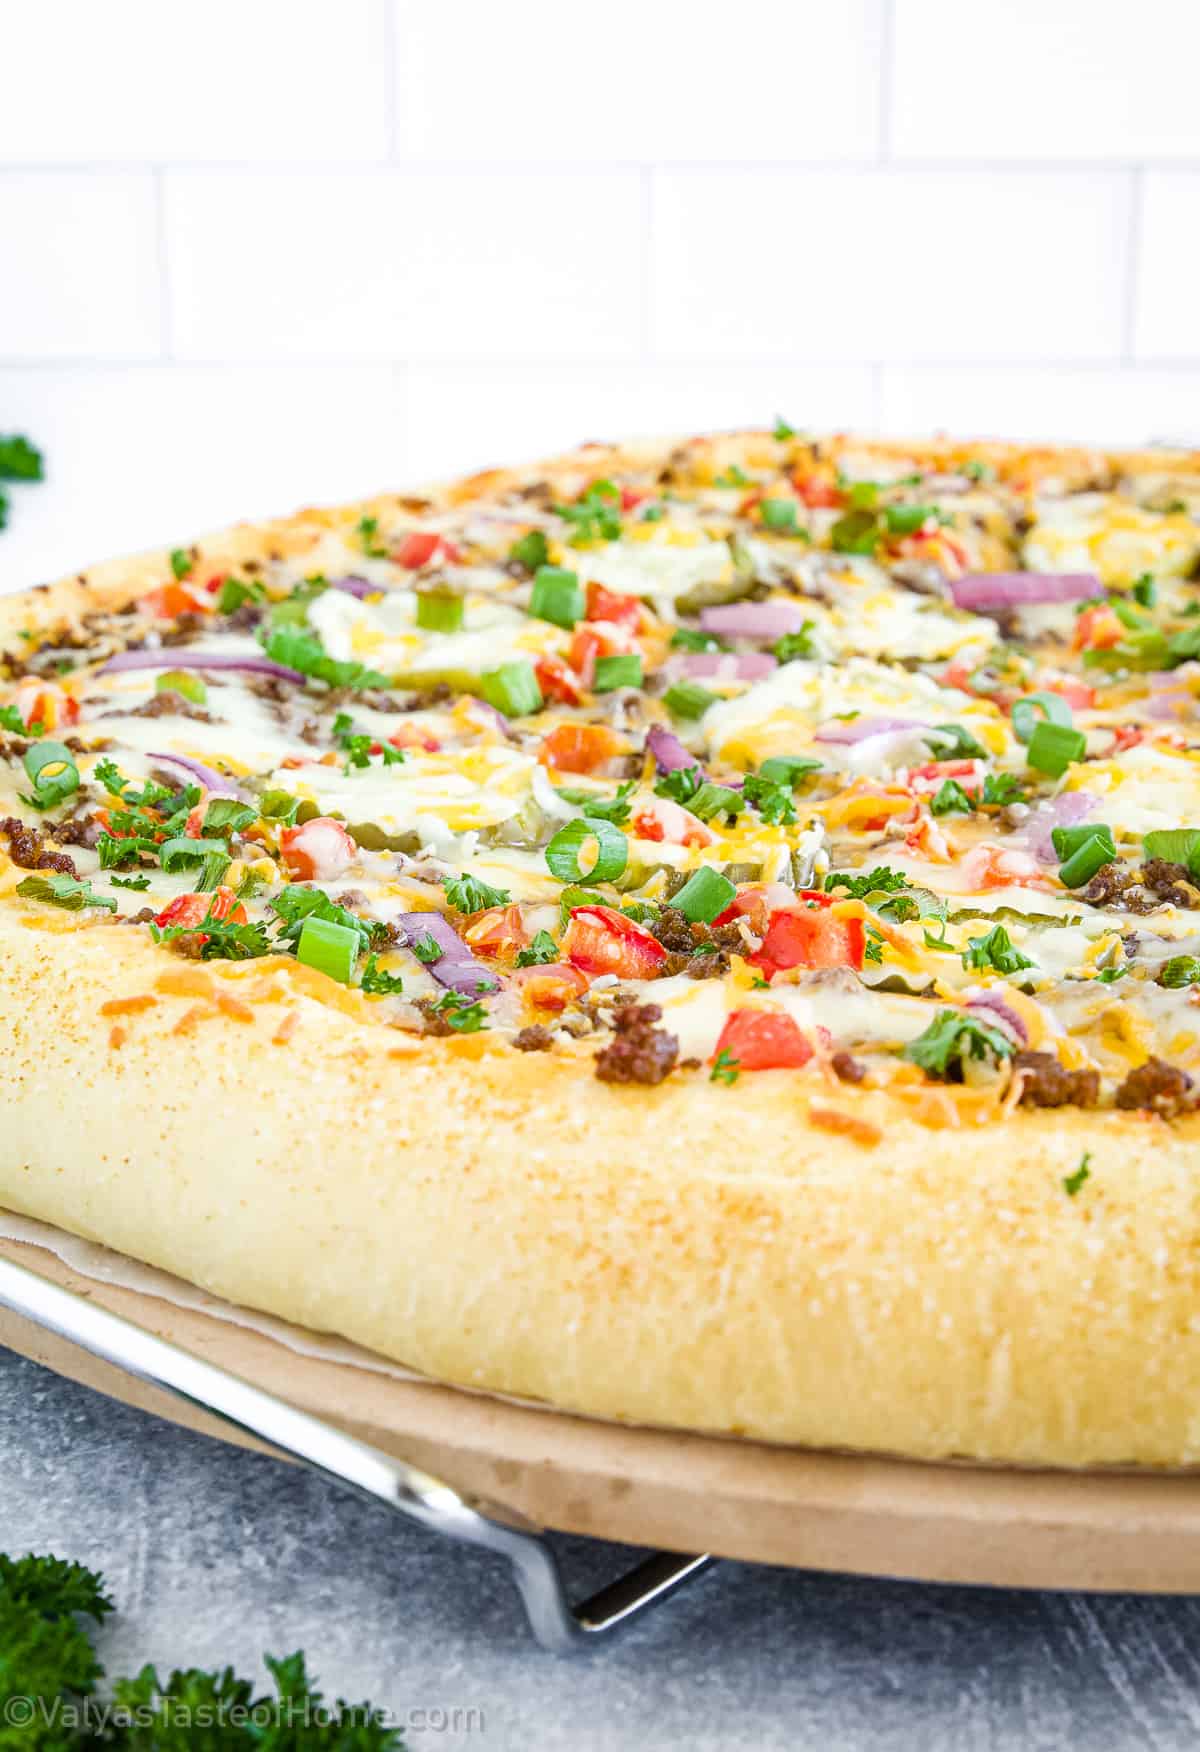 Cheeseburger pizza is inspired by the classic cheeseburger. It typically consists of a pizza crust topped with ground beef, cheddar cheese, tomatoes, onions, pickles, and with a ketchup sauce base.